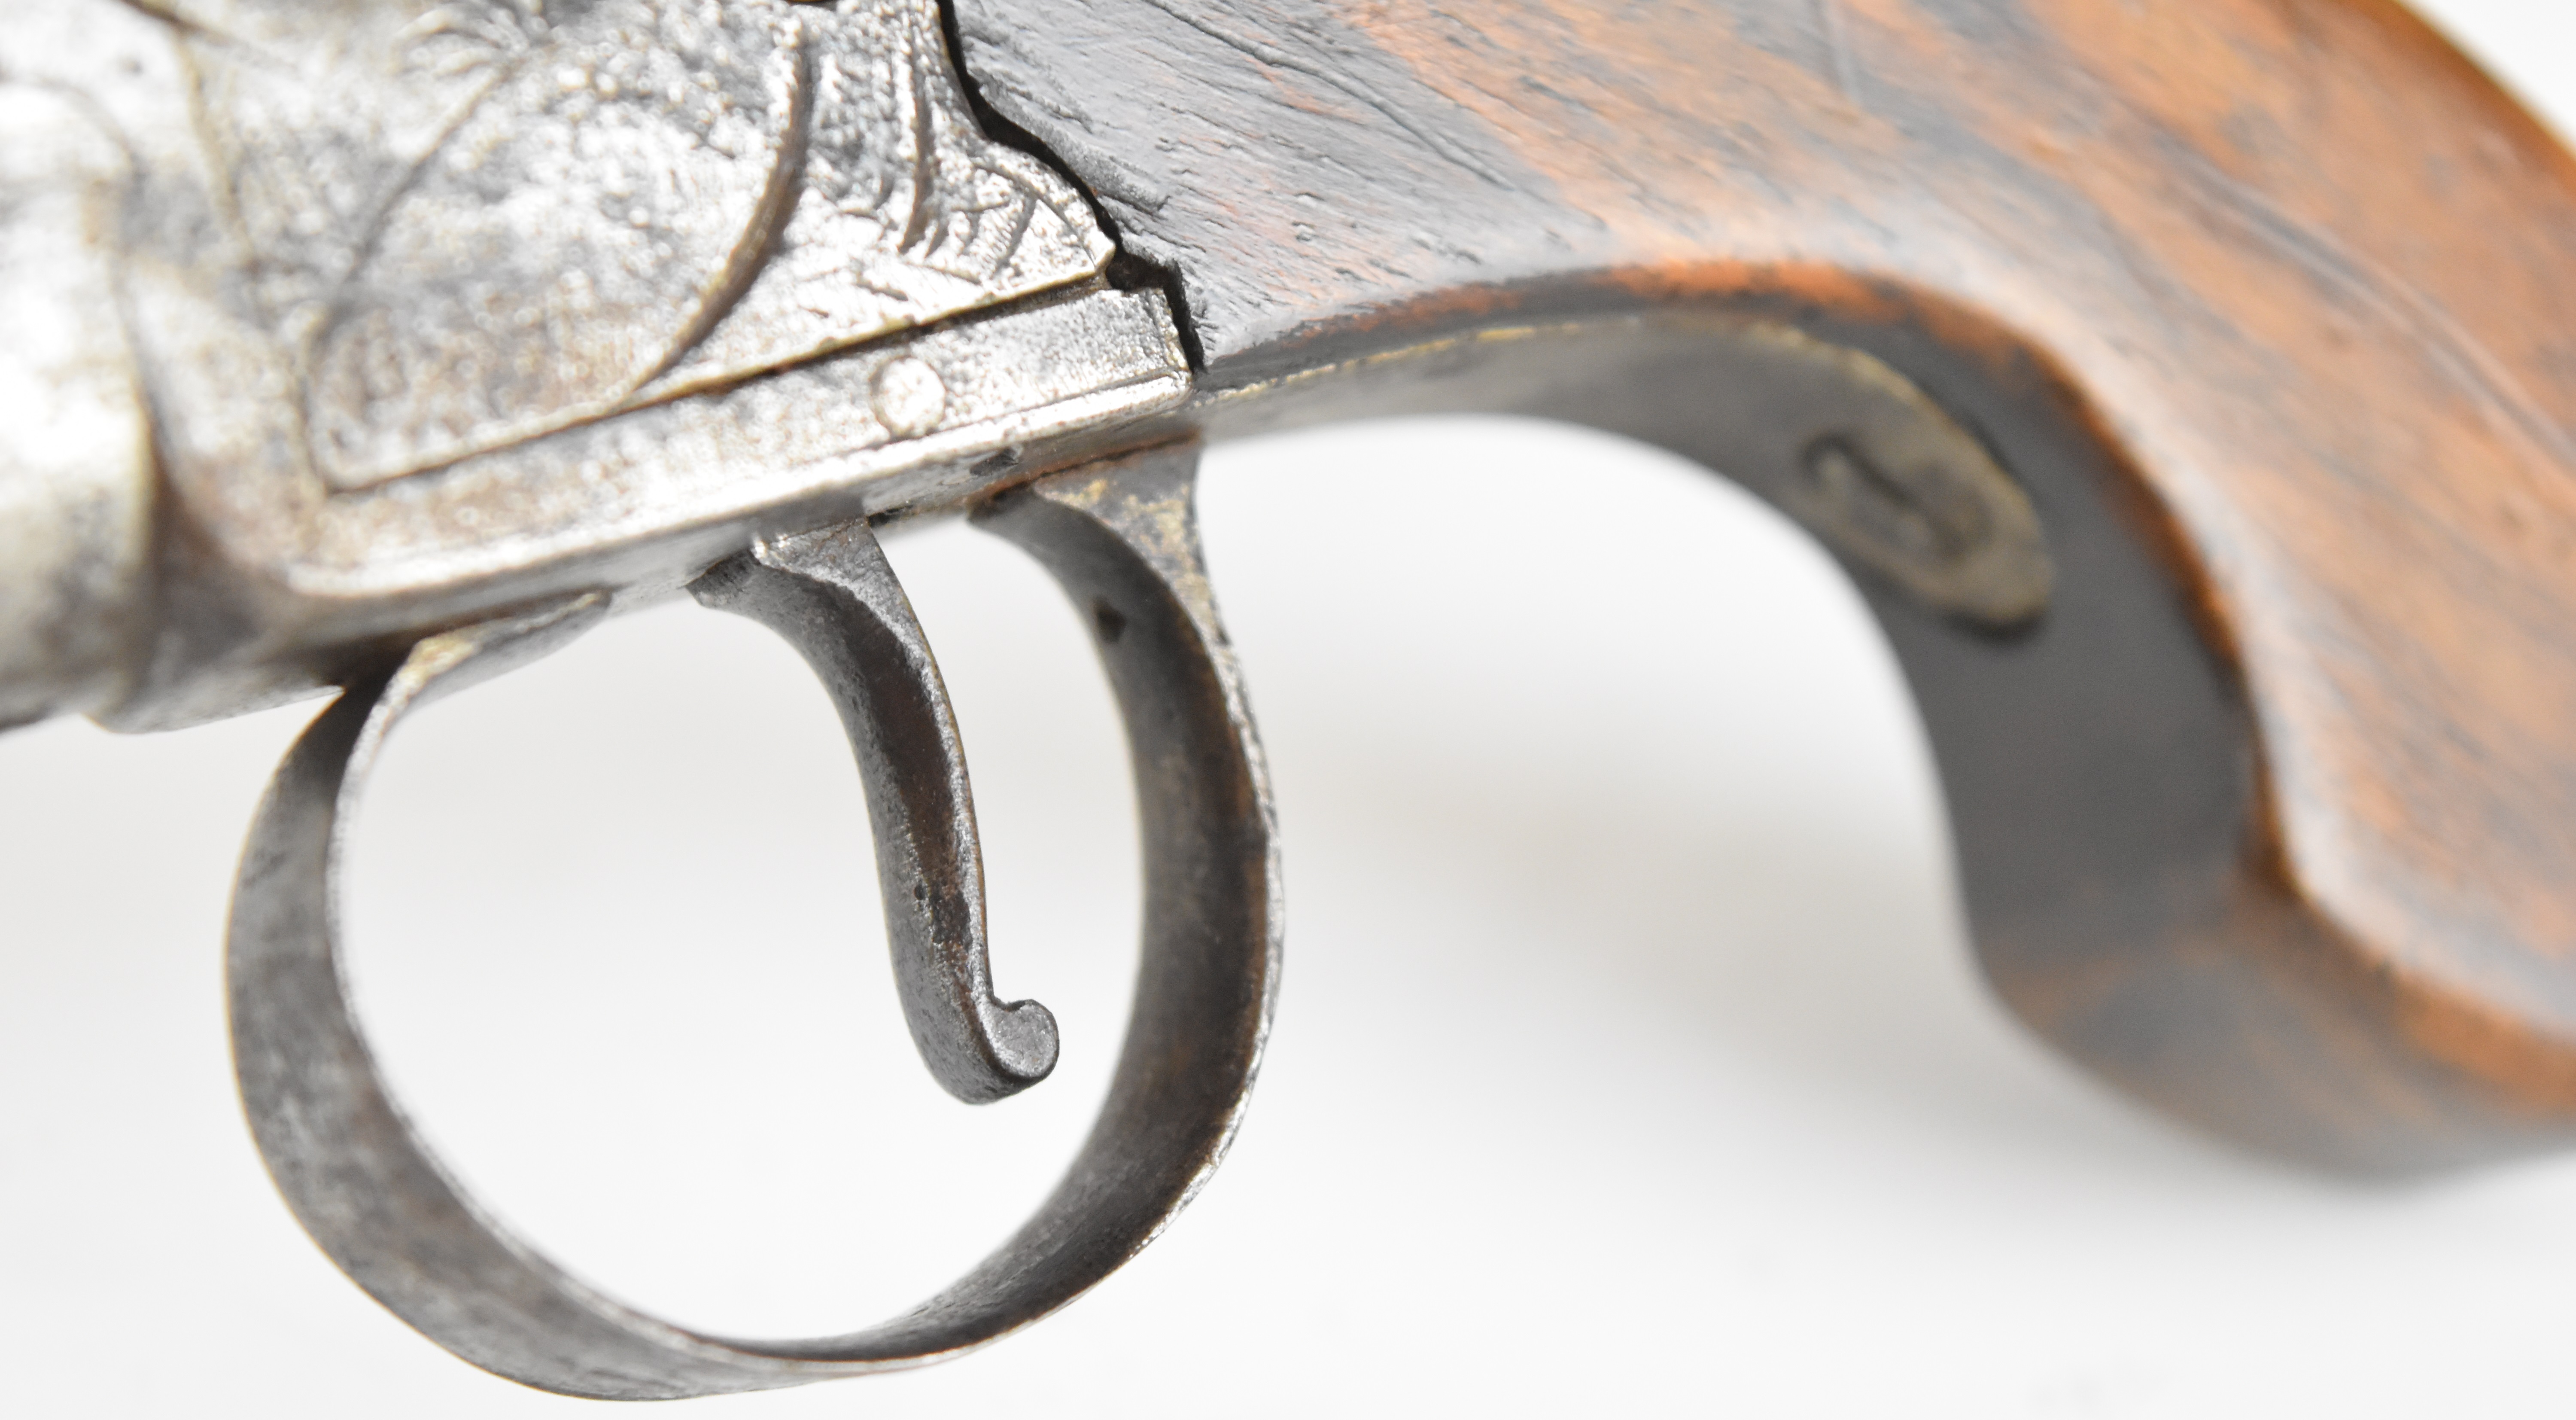 Unnamed 40 bore flintlock pocket pistol with engraved lock, wooden grip and 2 inch turn-off - Image 6 of 12